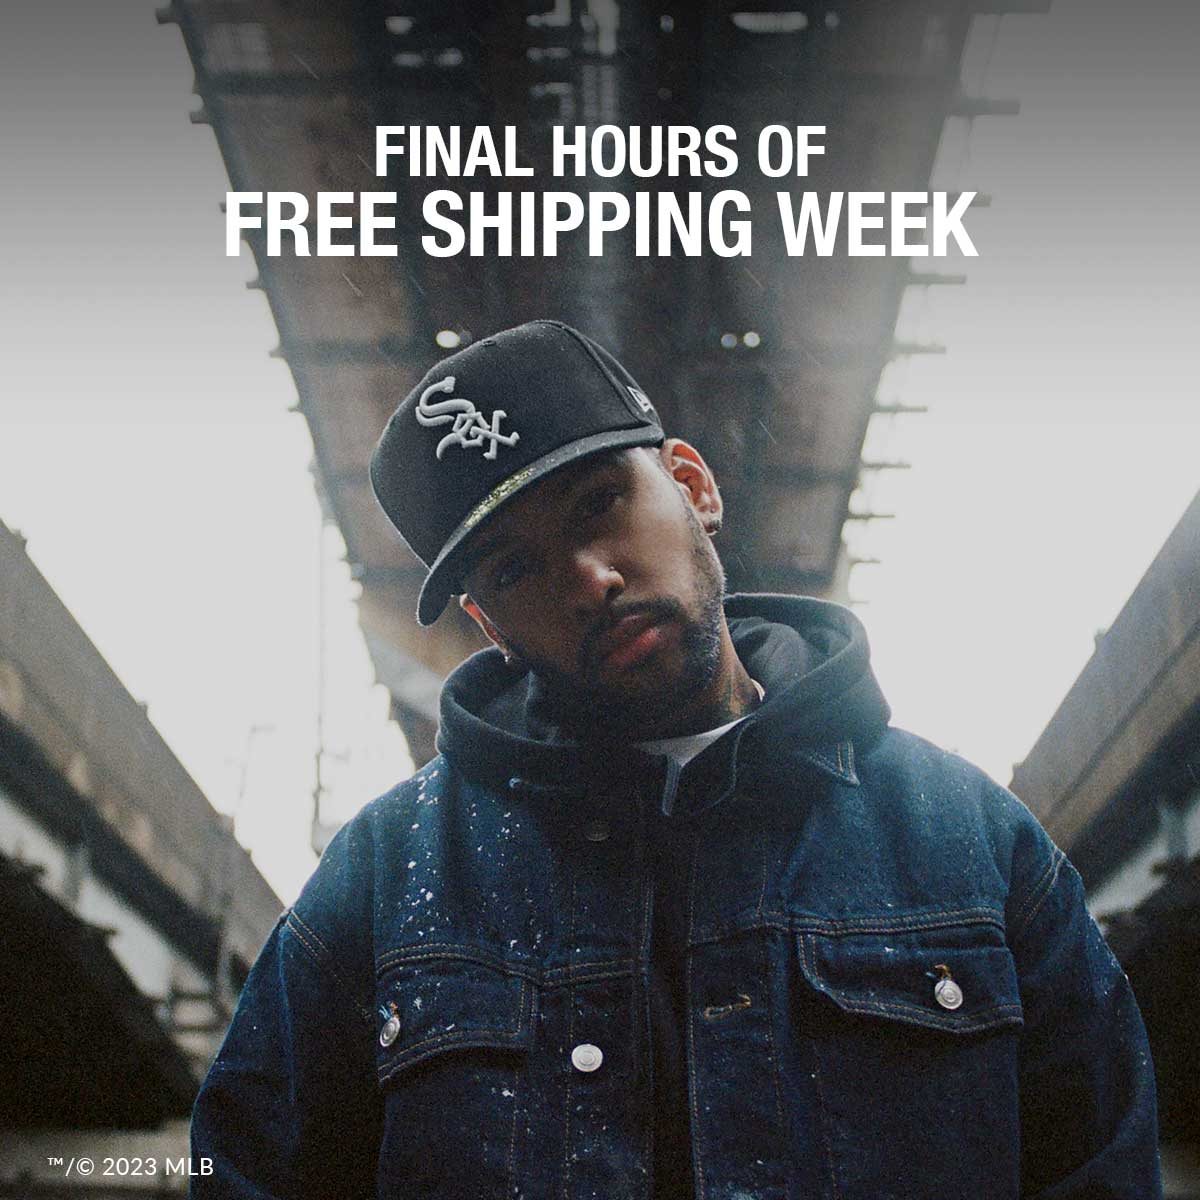 Final hours of Free Shipping Week